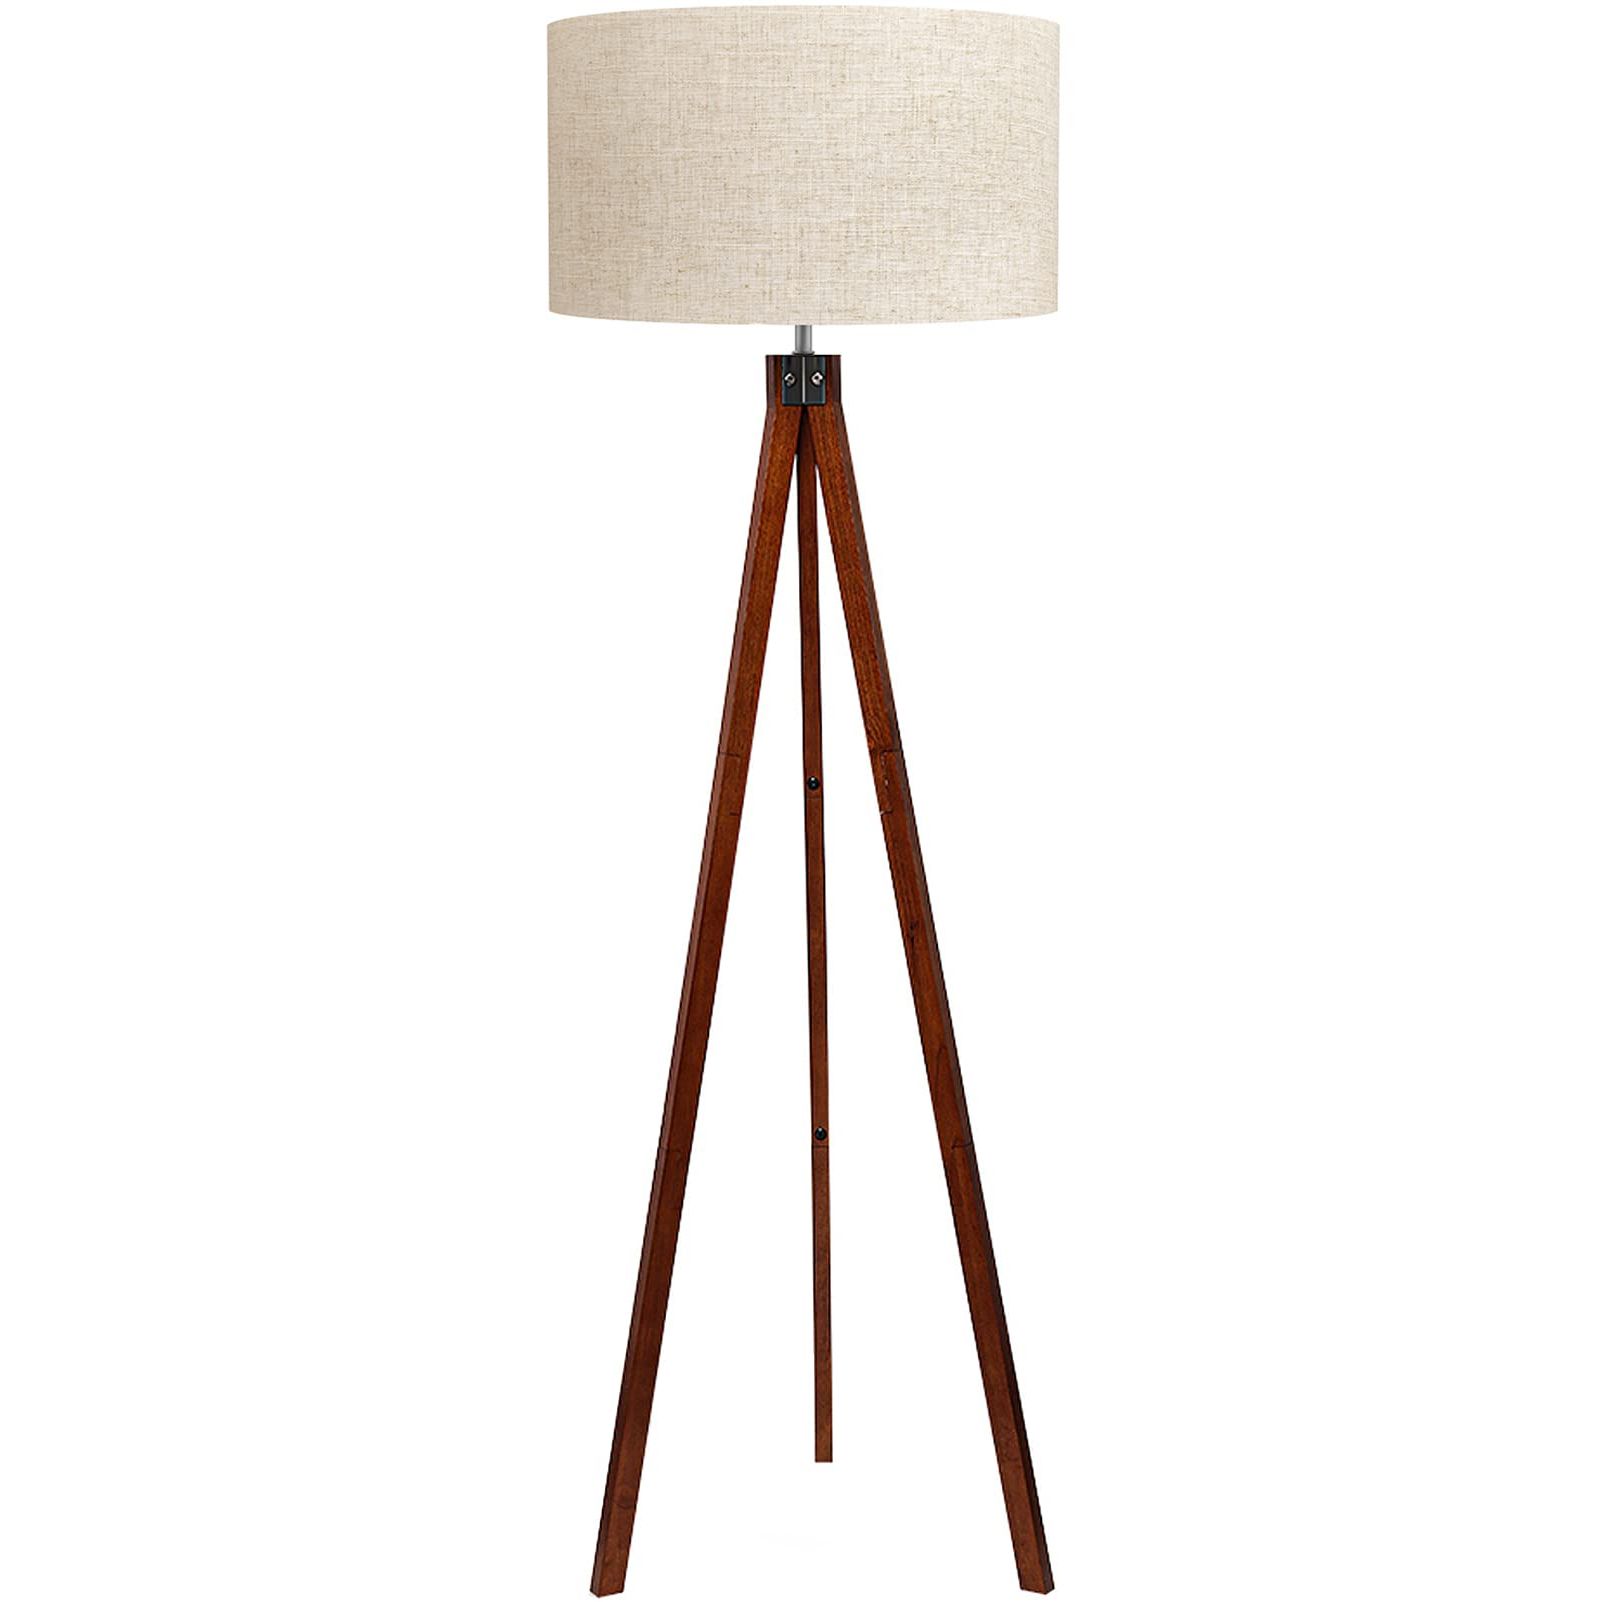 Tripod Standing Lamps Throughout 2019 Lepower Wood Tripod Floor Lamp, Mid Century Standing Lamp, Modern Design  Studying Light For Living Room, (View 2 of 15)